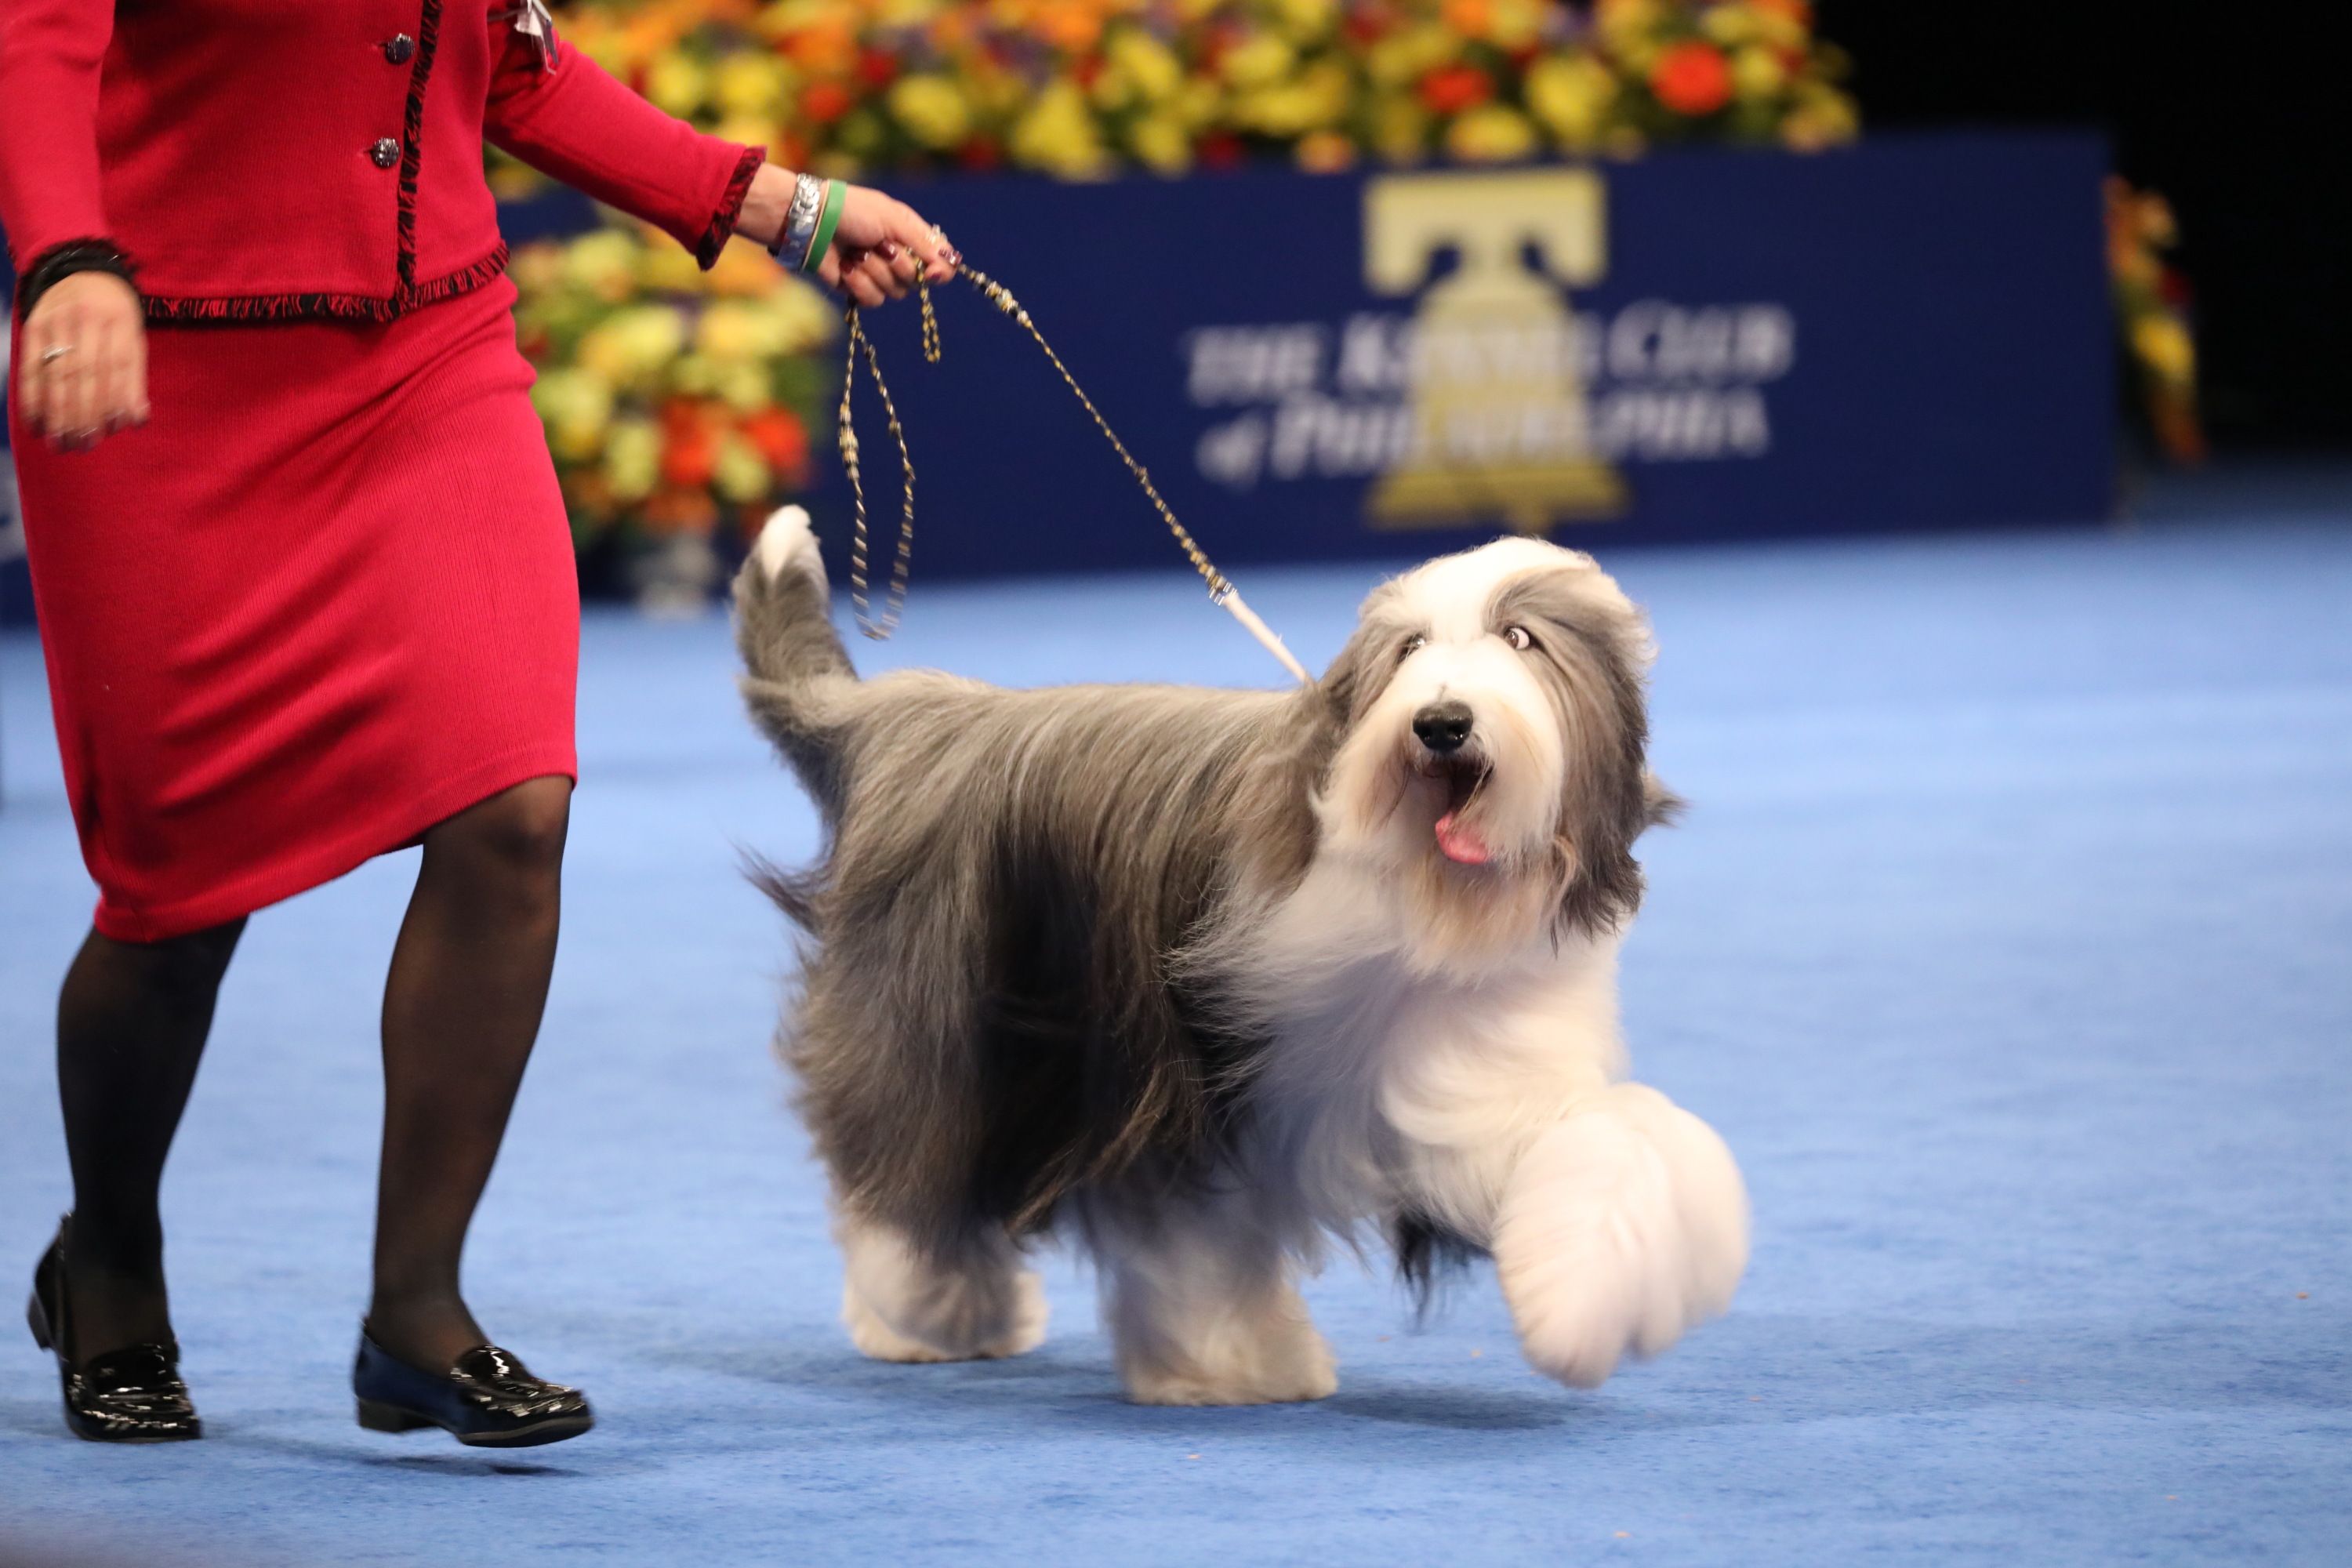 18 Long-Haired Dogs: Afghan Hound, Bearded Collie, and More